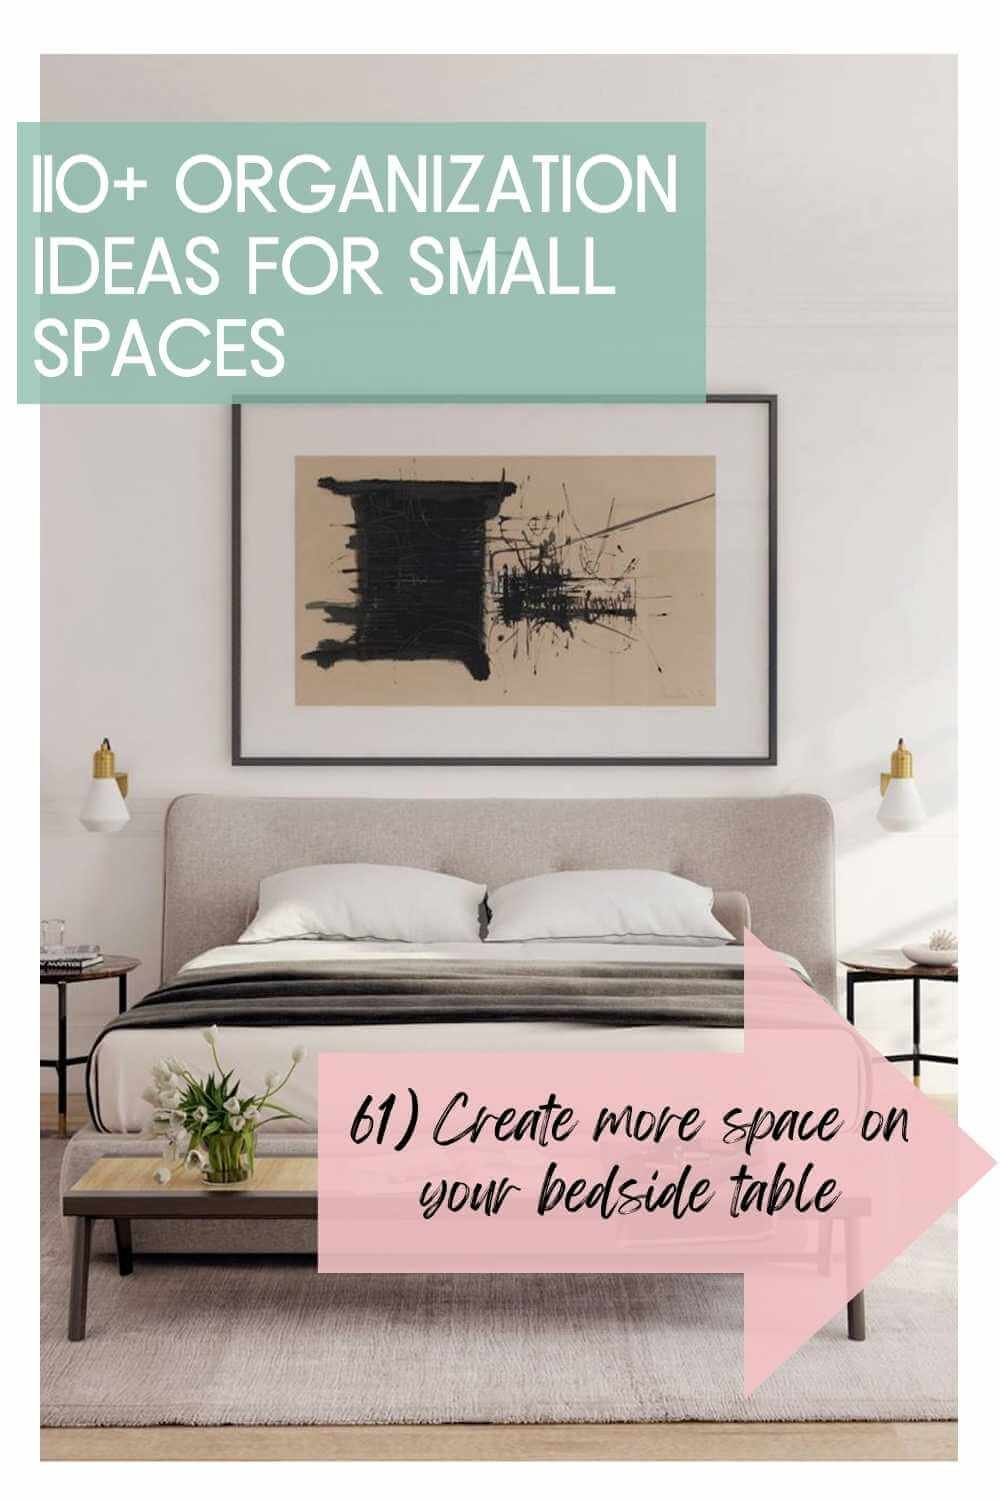 How to Organize a Small Bedroom to Maximize Space